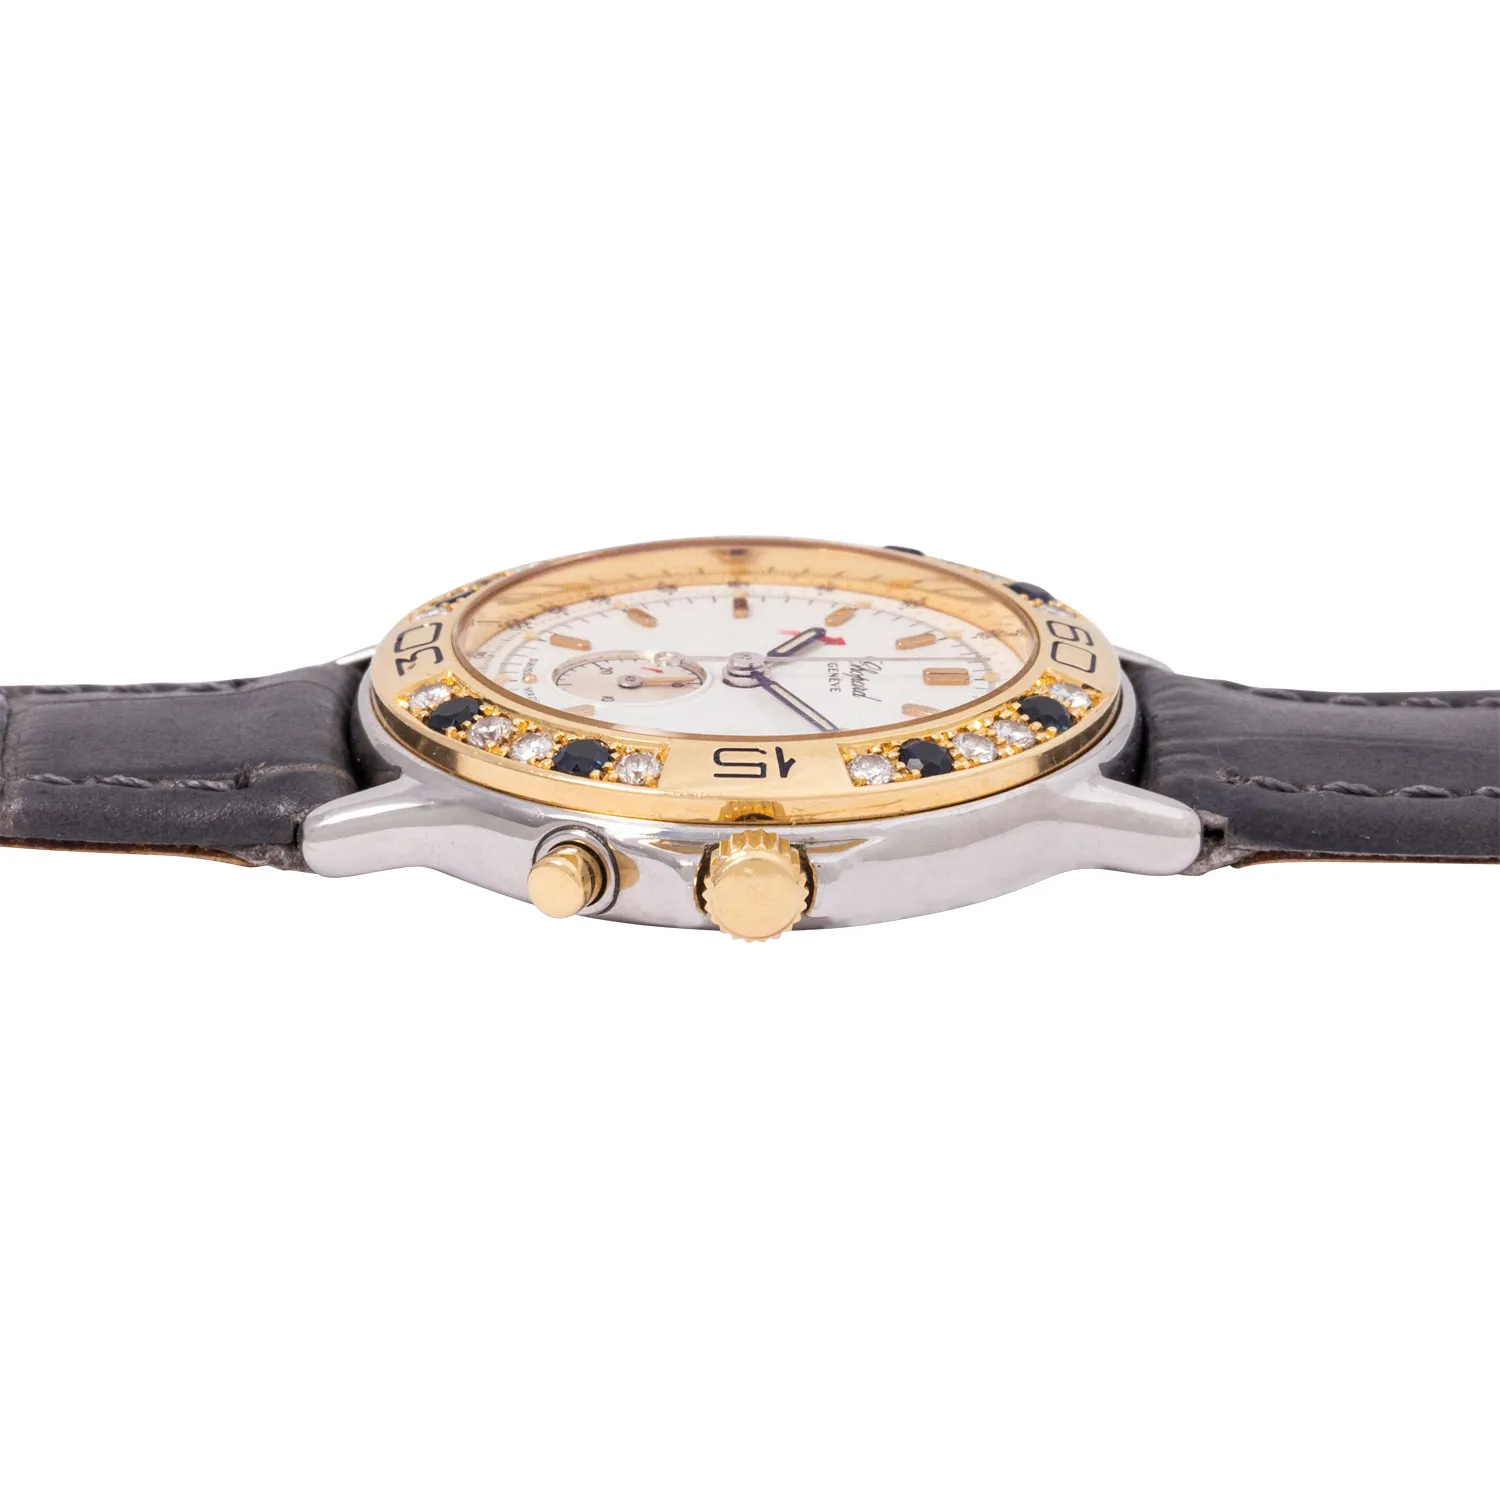 Chopard Mille Miglia 8175 31mm Stainless steel, yellow gold, diamon and sapphire-set 1